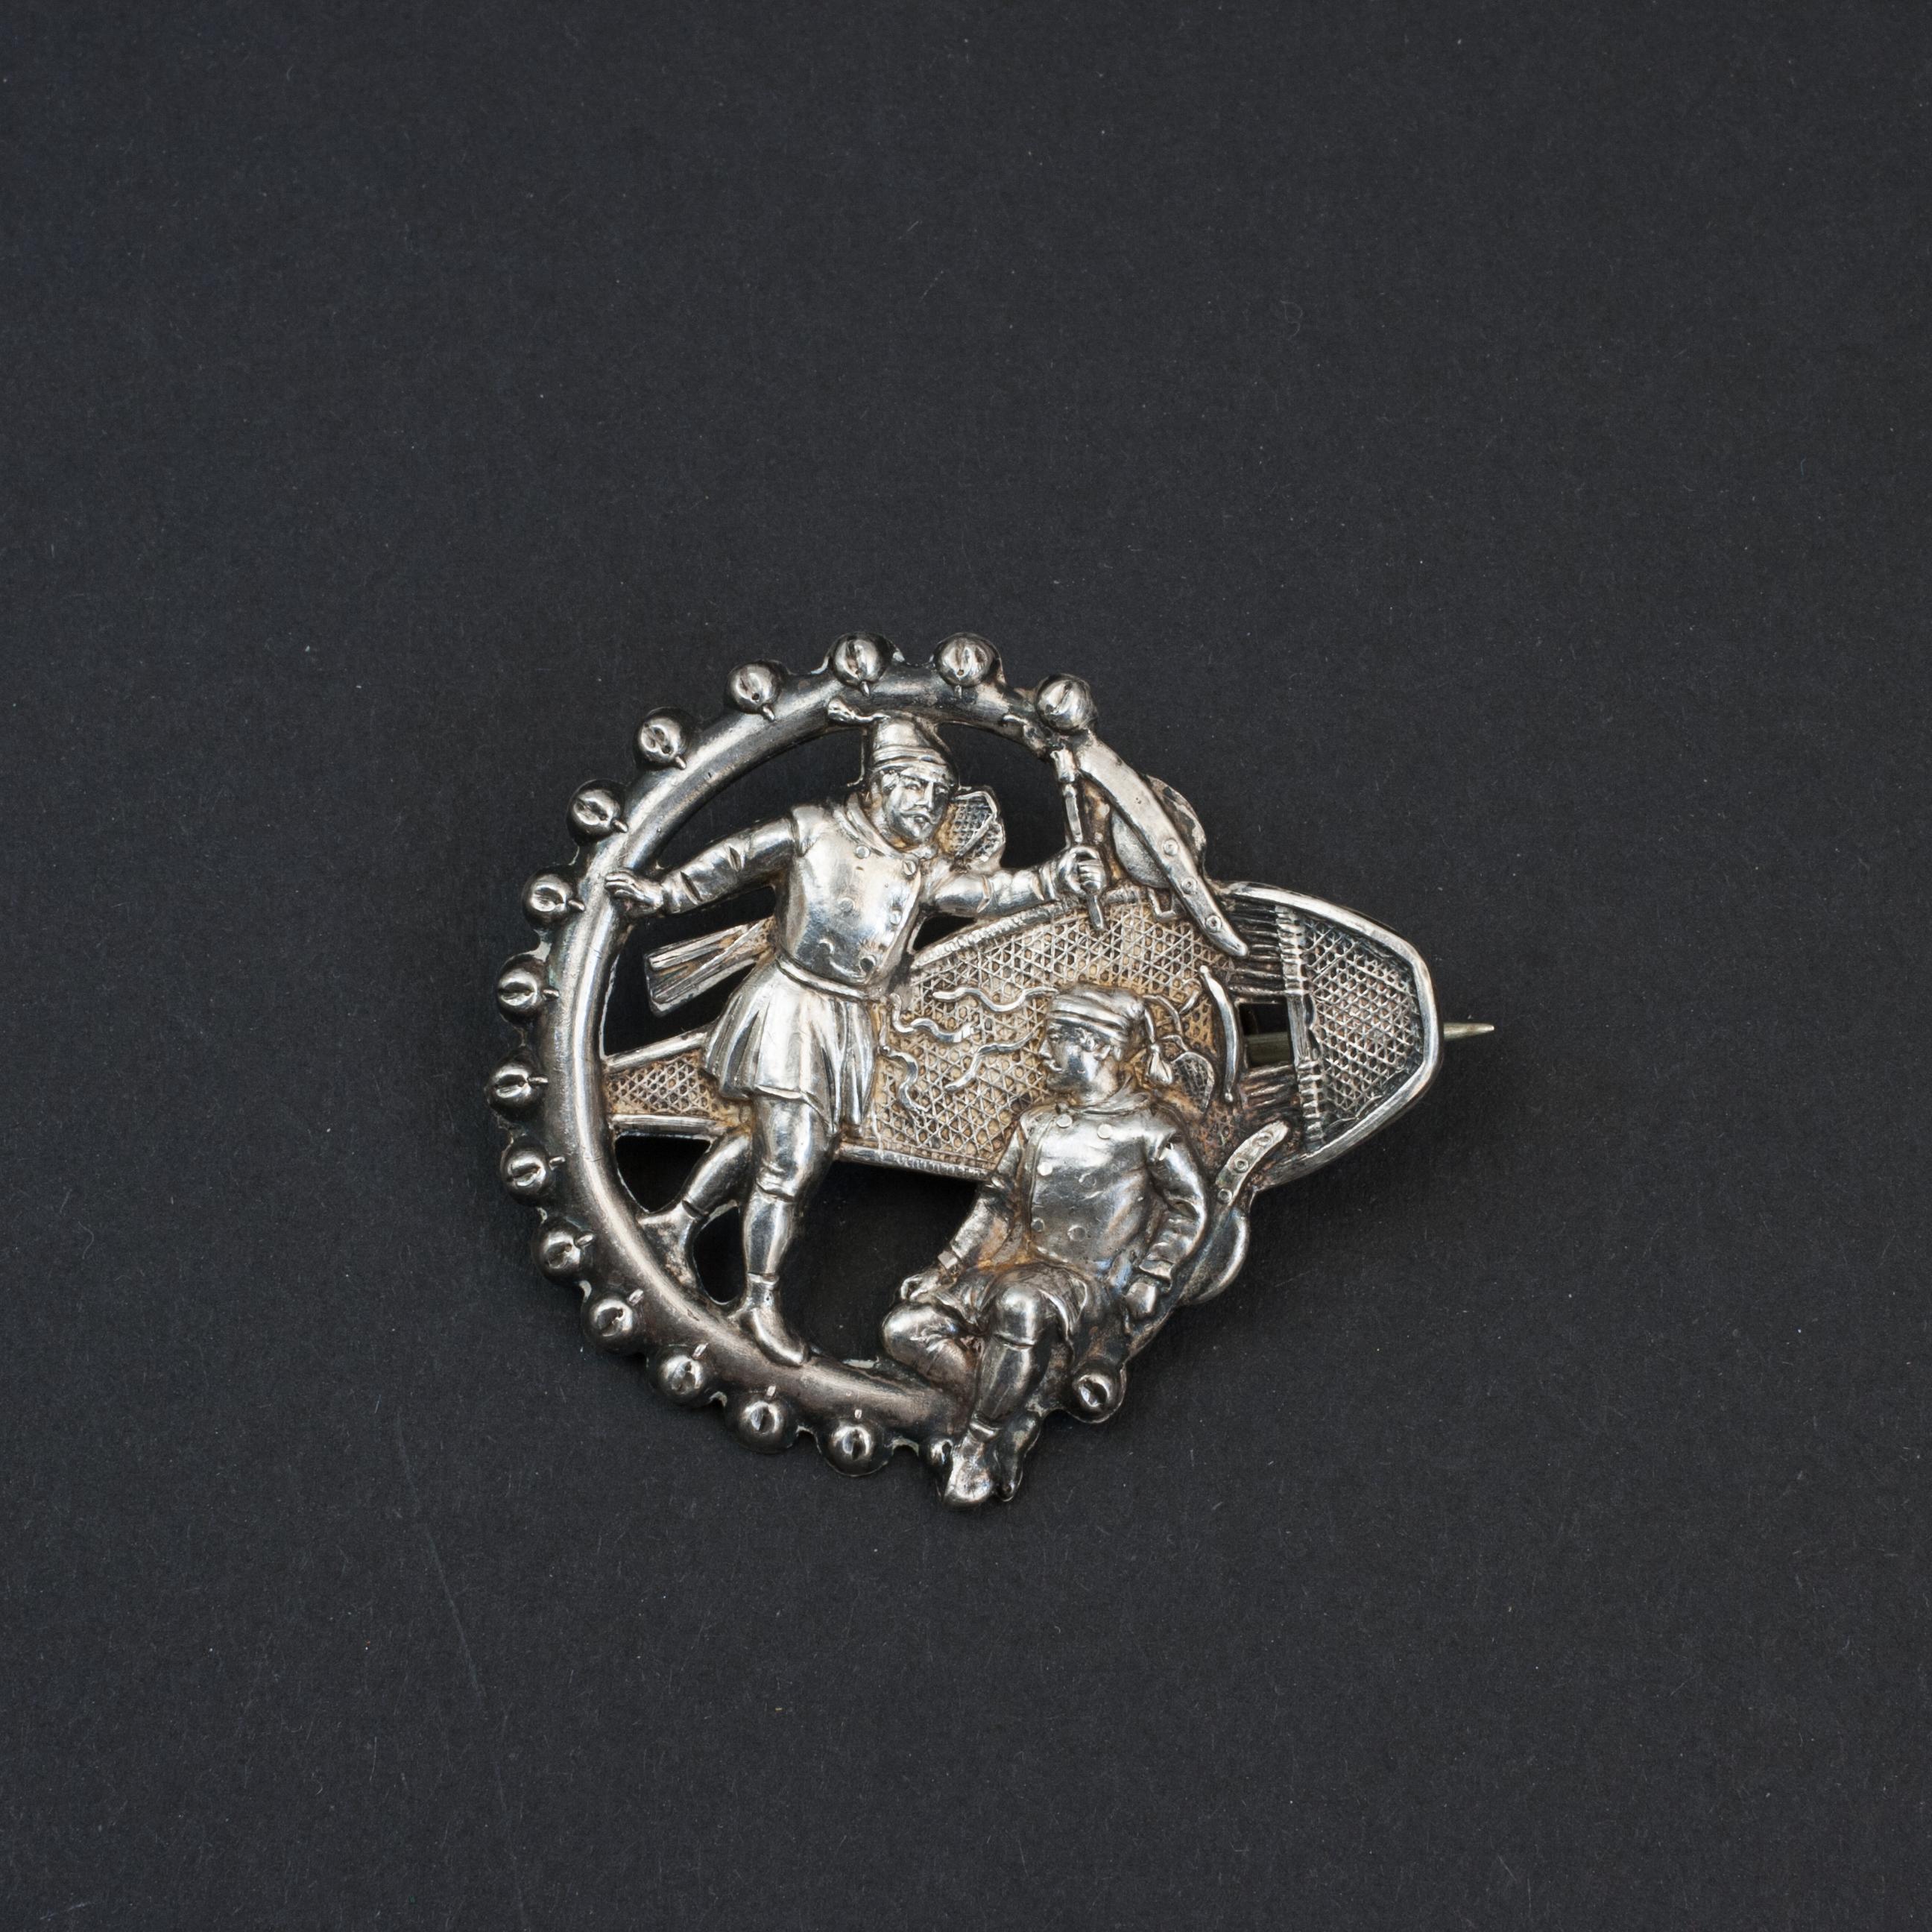 Sporting Art Antique Snowshoe Brooch Or Pin. Wintersport. For Sale